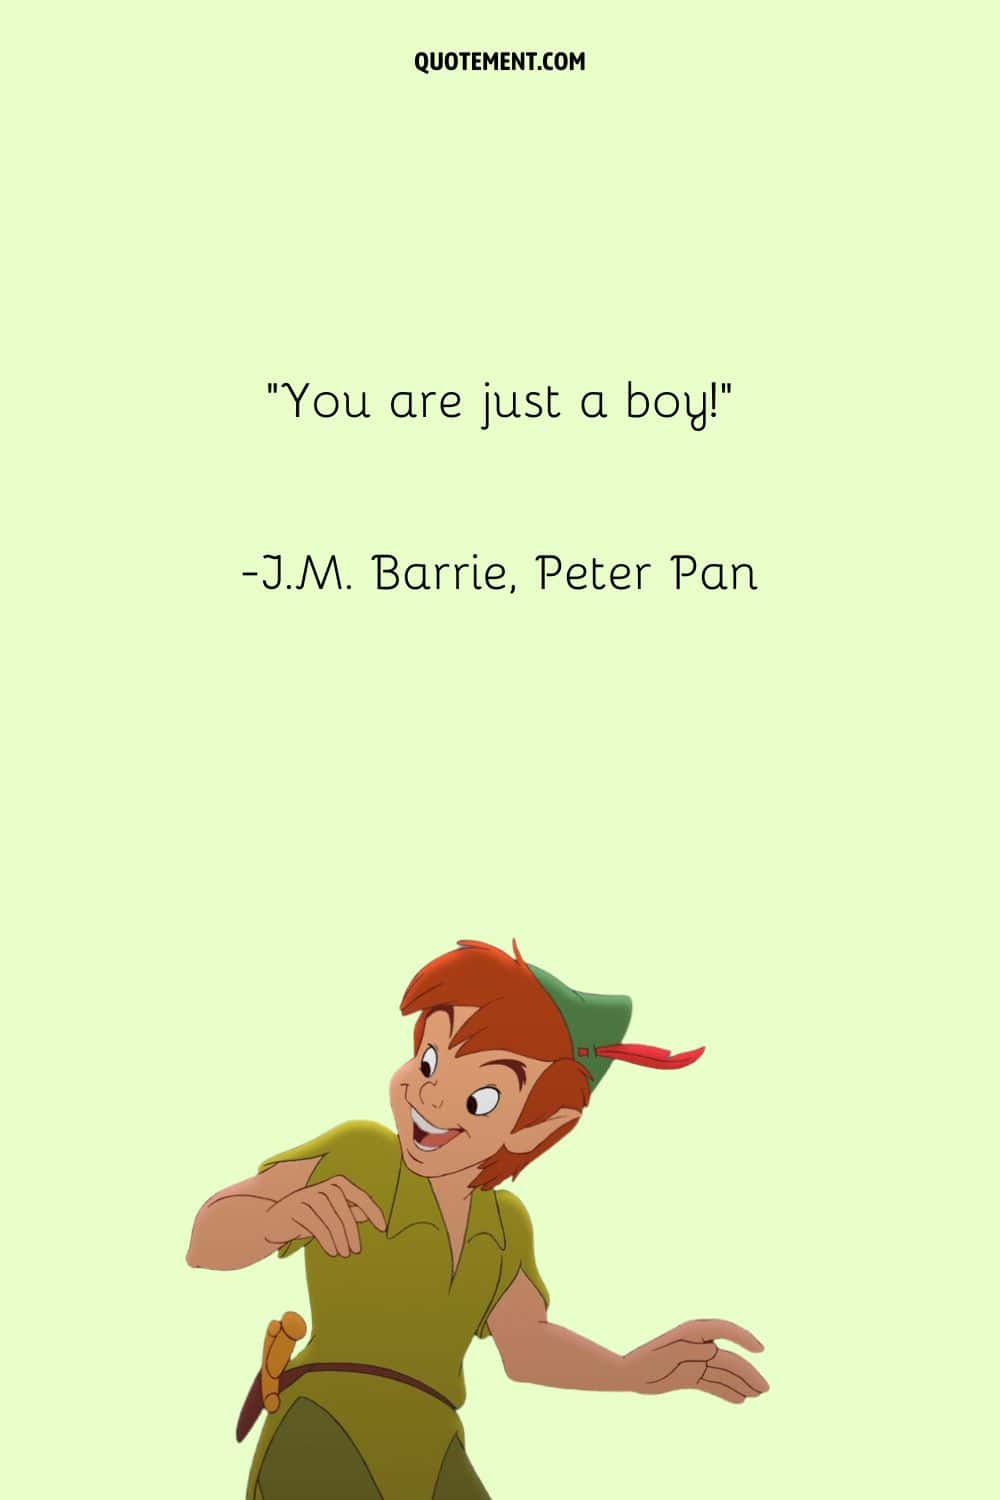 “You are just a boy!” ― J.M. Barrie, Peter Pan